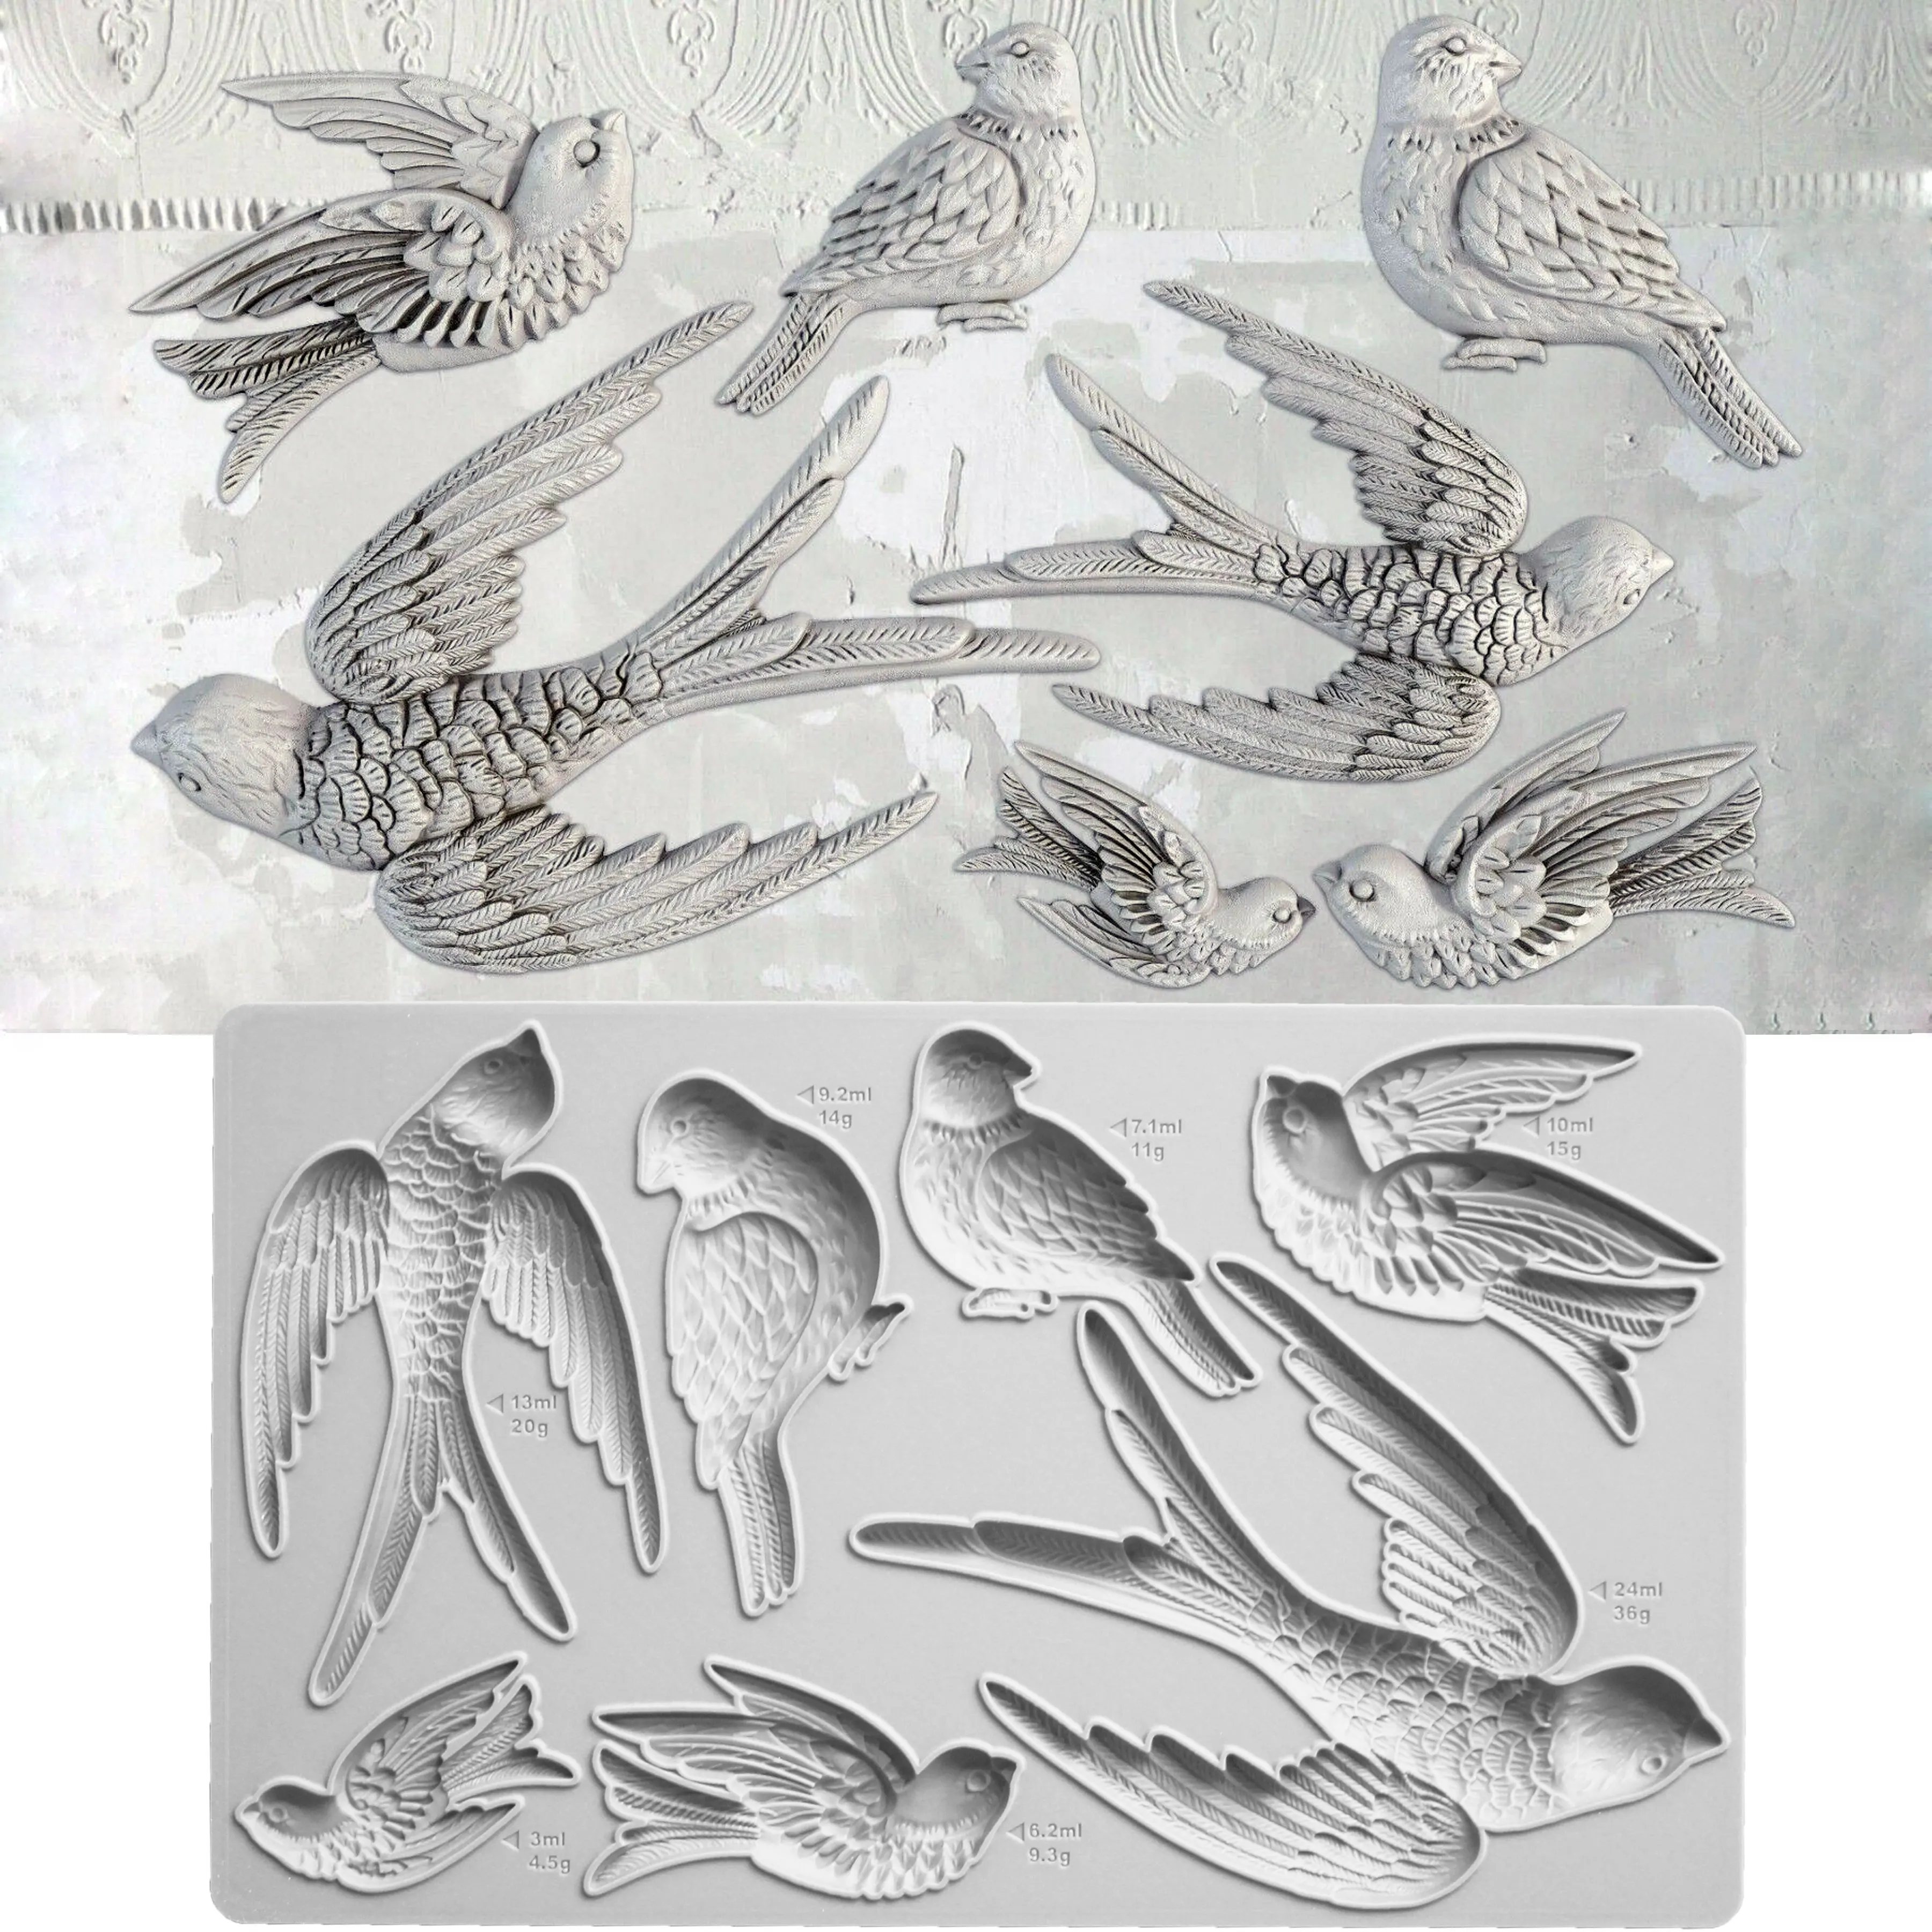 Birds, The Swallow Mould Silicone Mold Fondant Cake Decorating Tool Gumpaste Sugarcraft Chocolate Forms Bakeware Tools